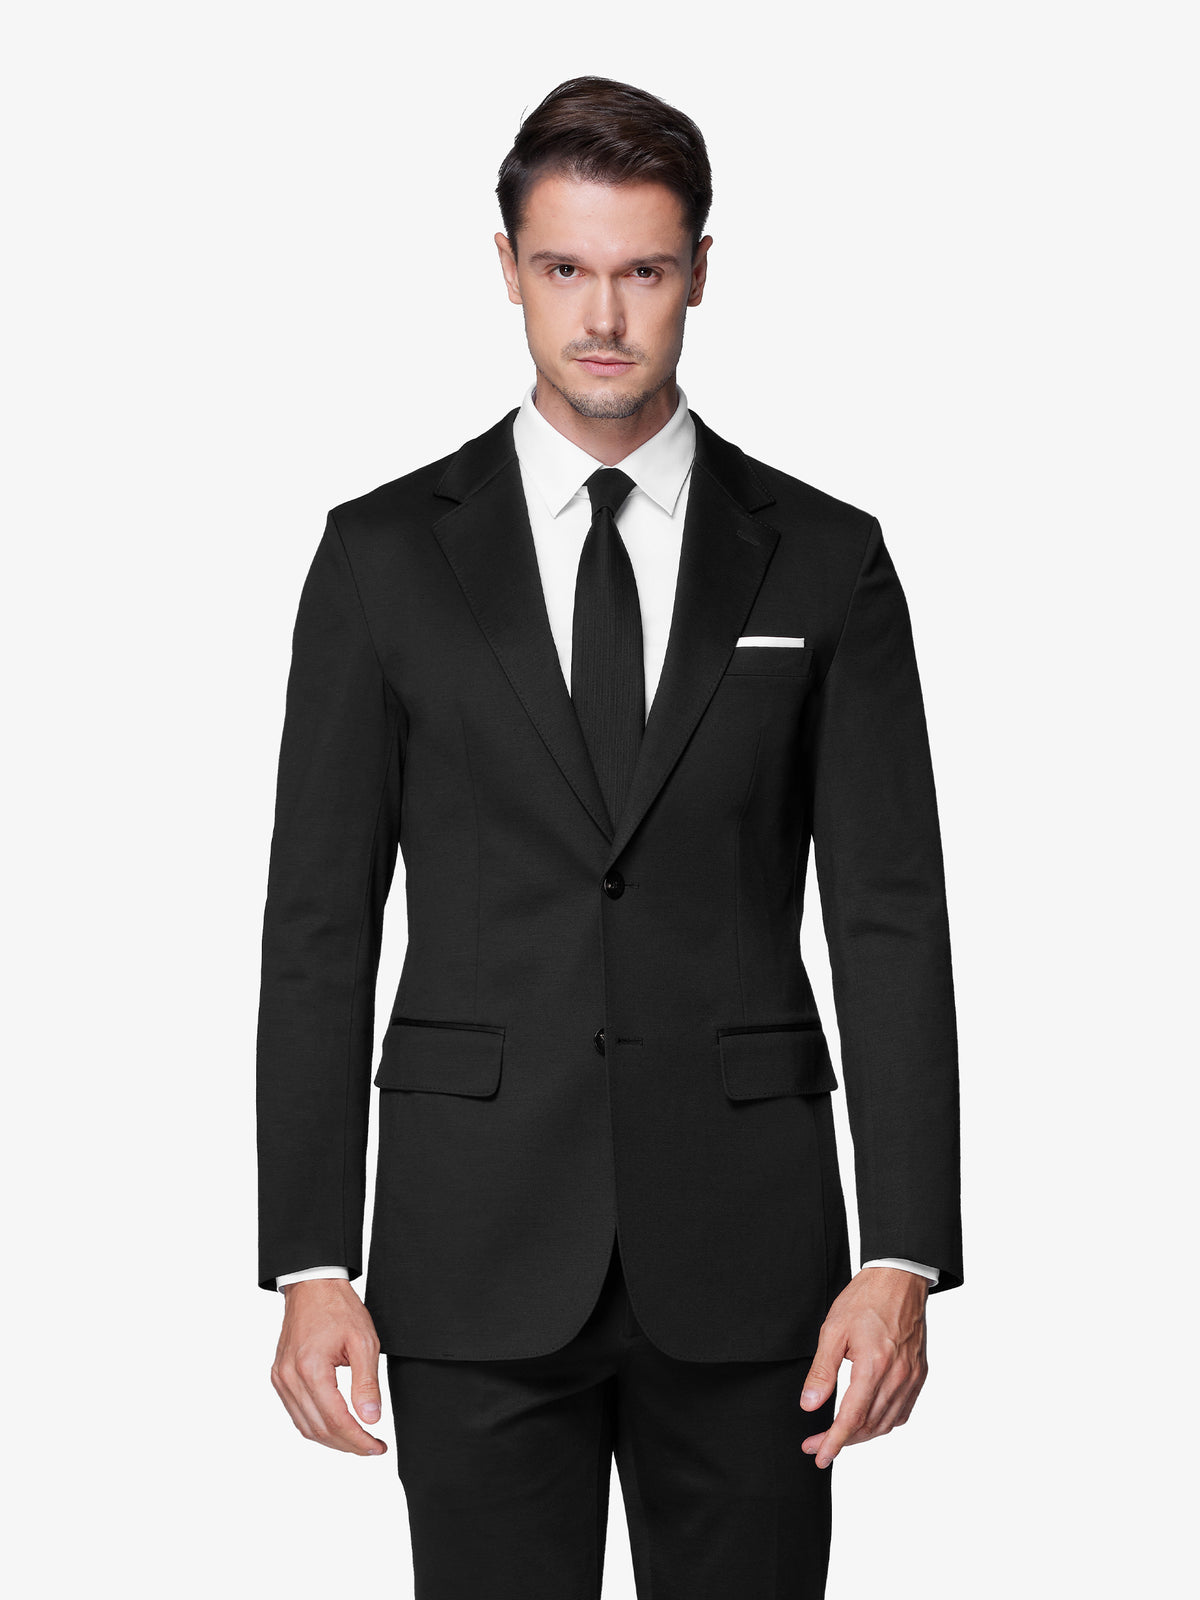 True Muscle Fit Suit Jacket in Black - TAILORED ATHLETE - USA